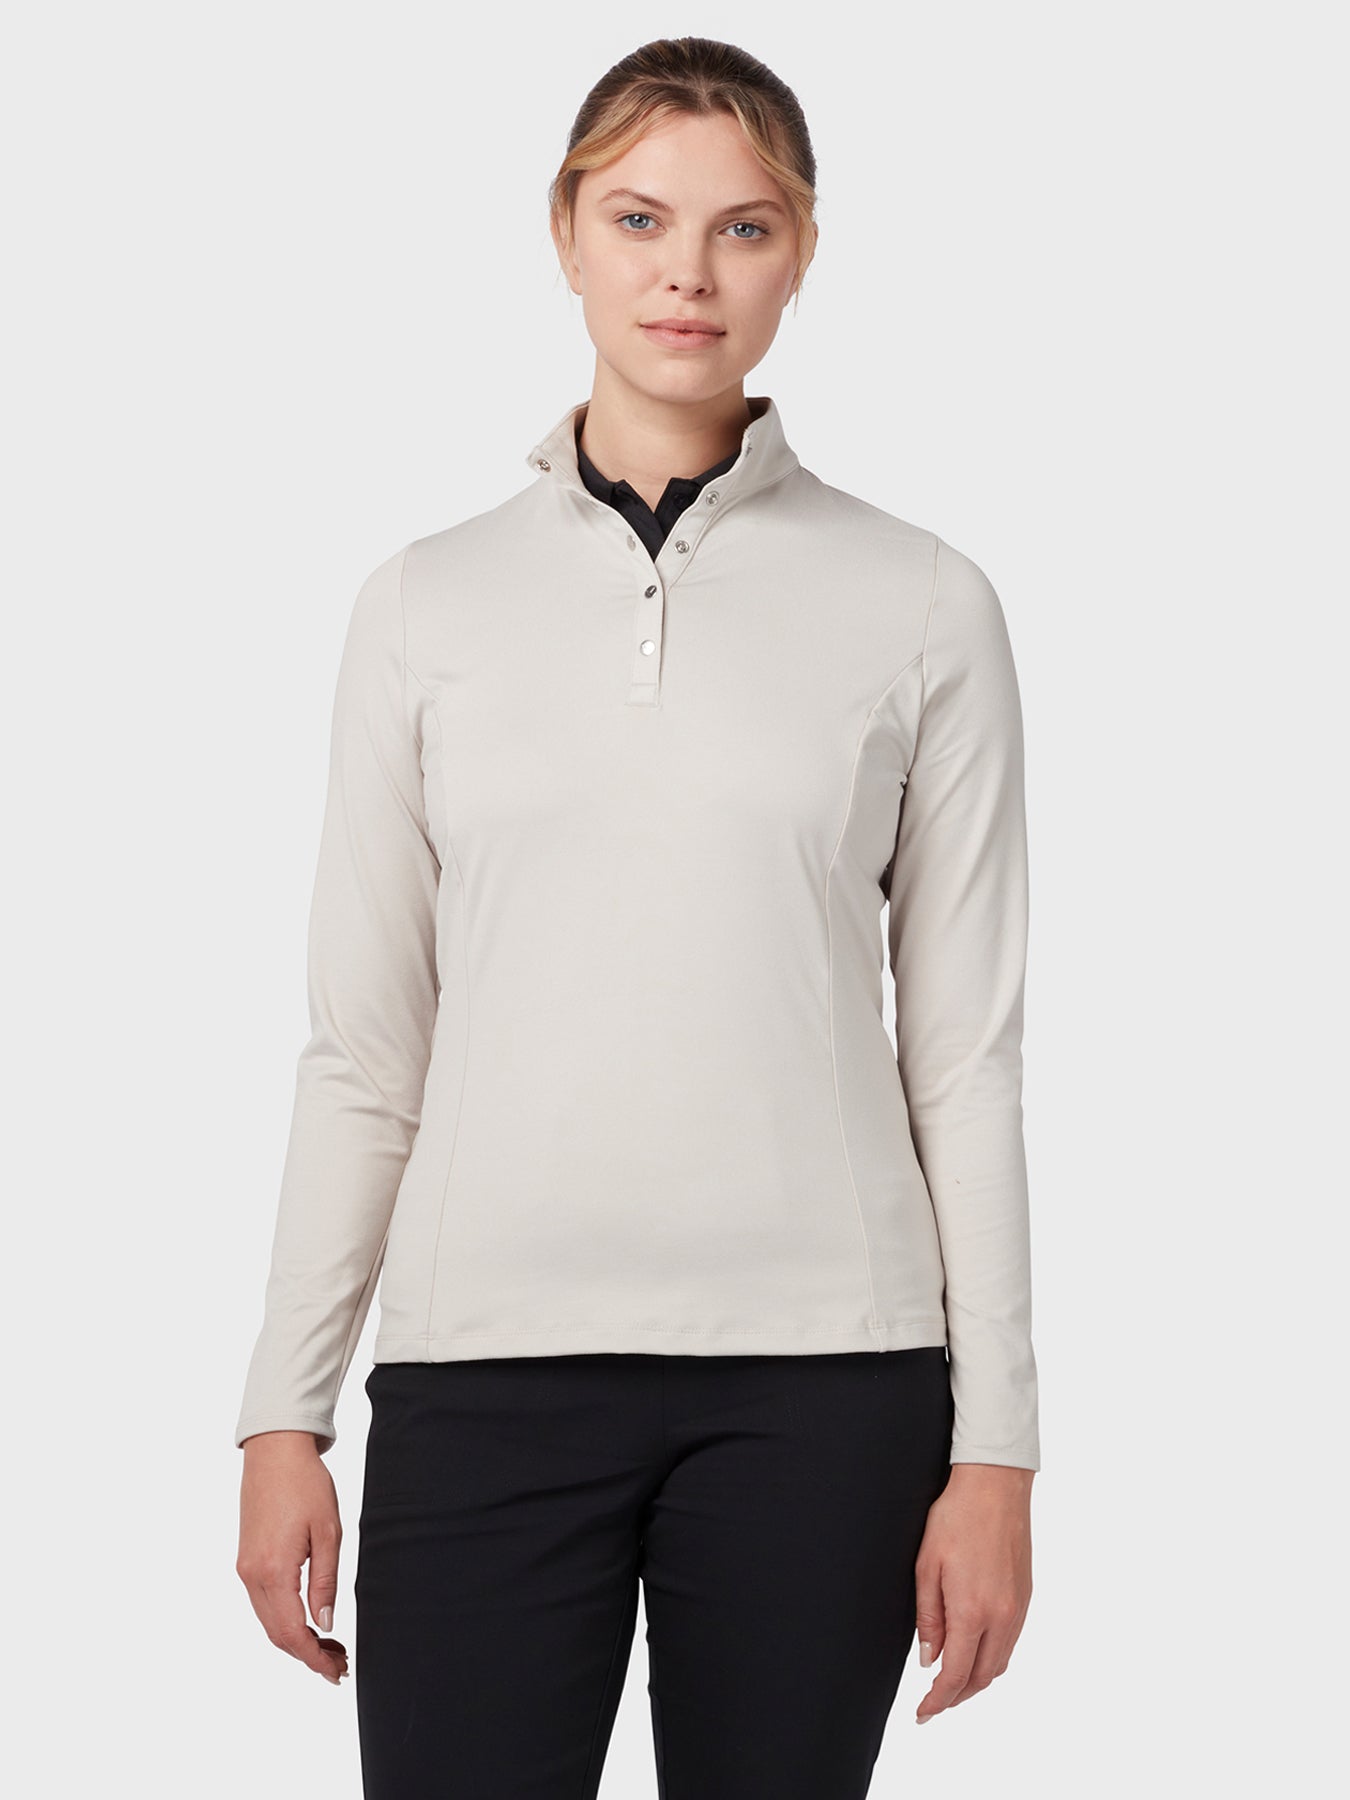 View Womens Thermal Longsleeve Fleece Back Jersey Polo In Chateau Grey Chateau Grey M information